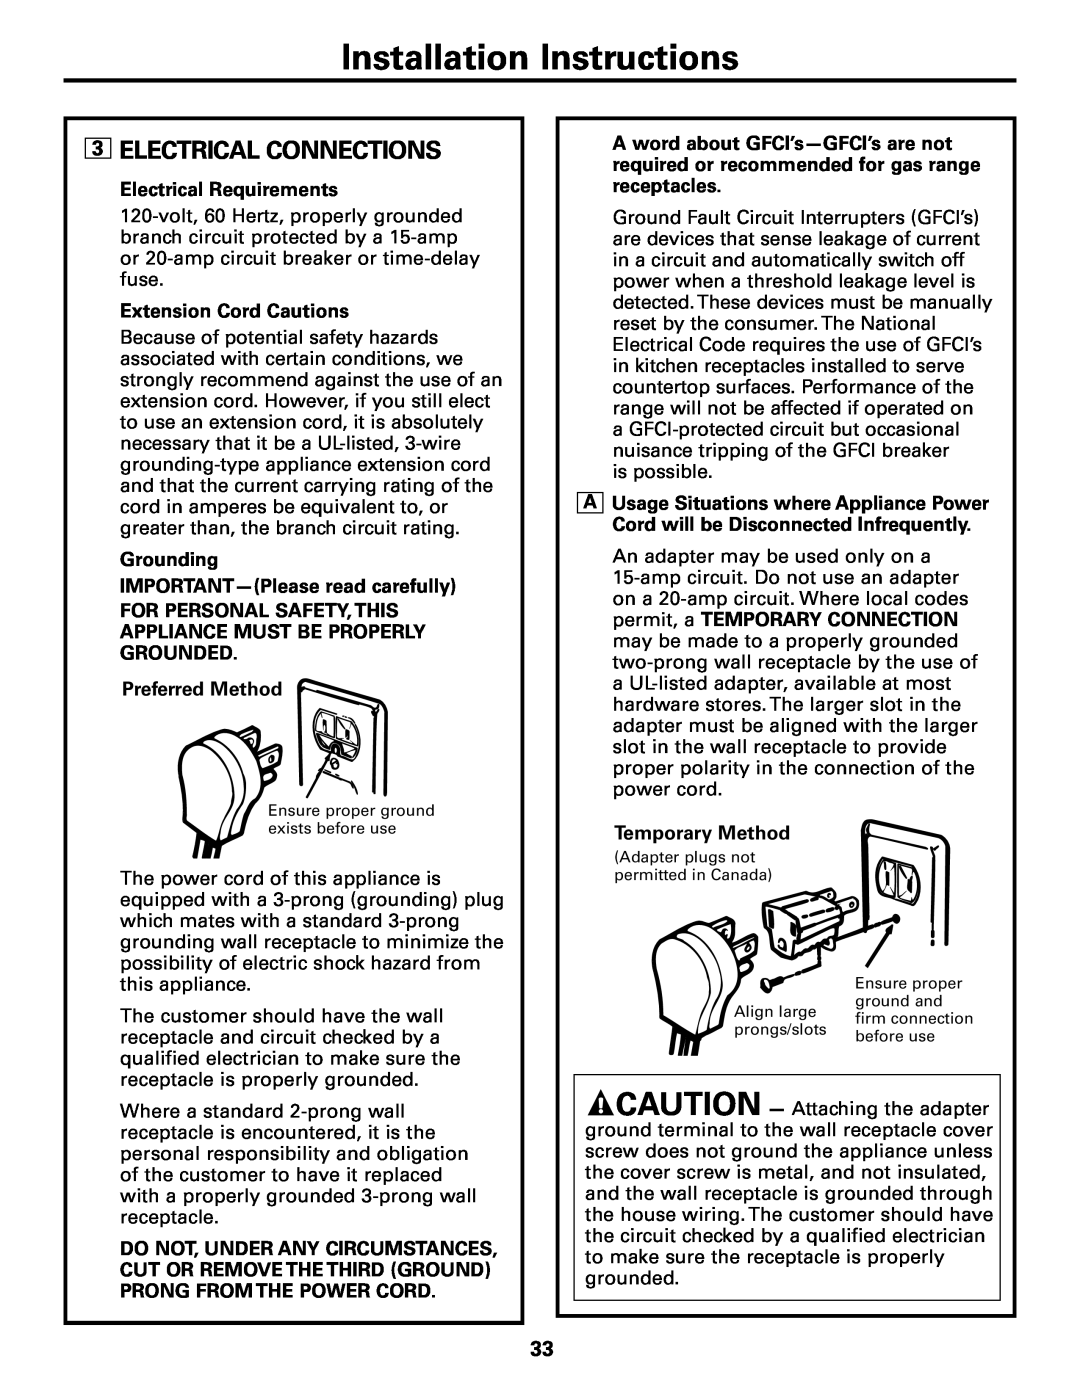 Americana Appliances AGBS300 3ELECTRICAL CONNECTIONS, Installation Instructions, Electrical Requirements, Preferred Method 